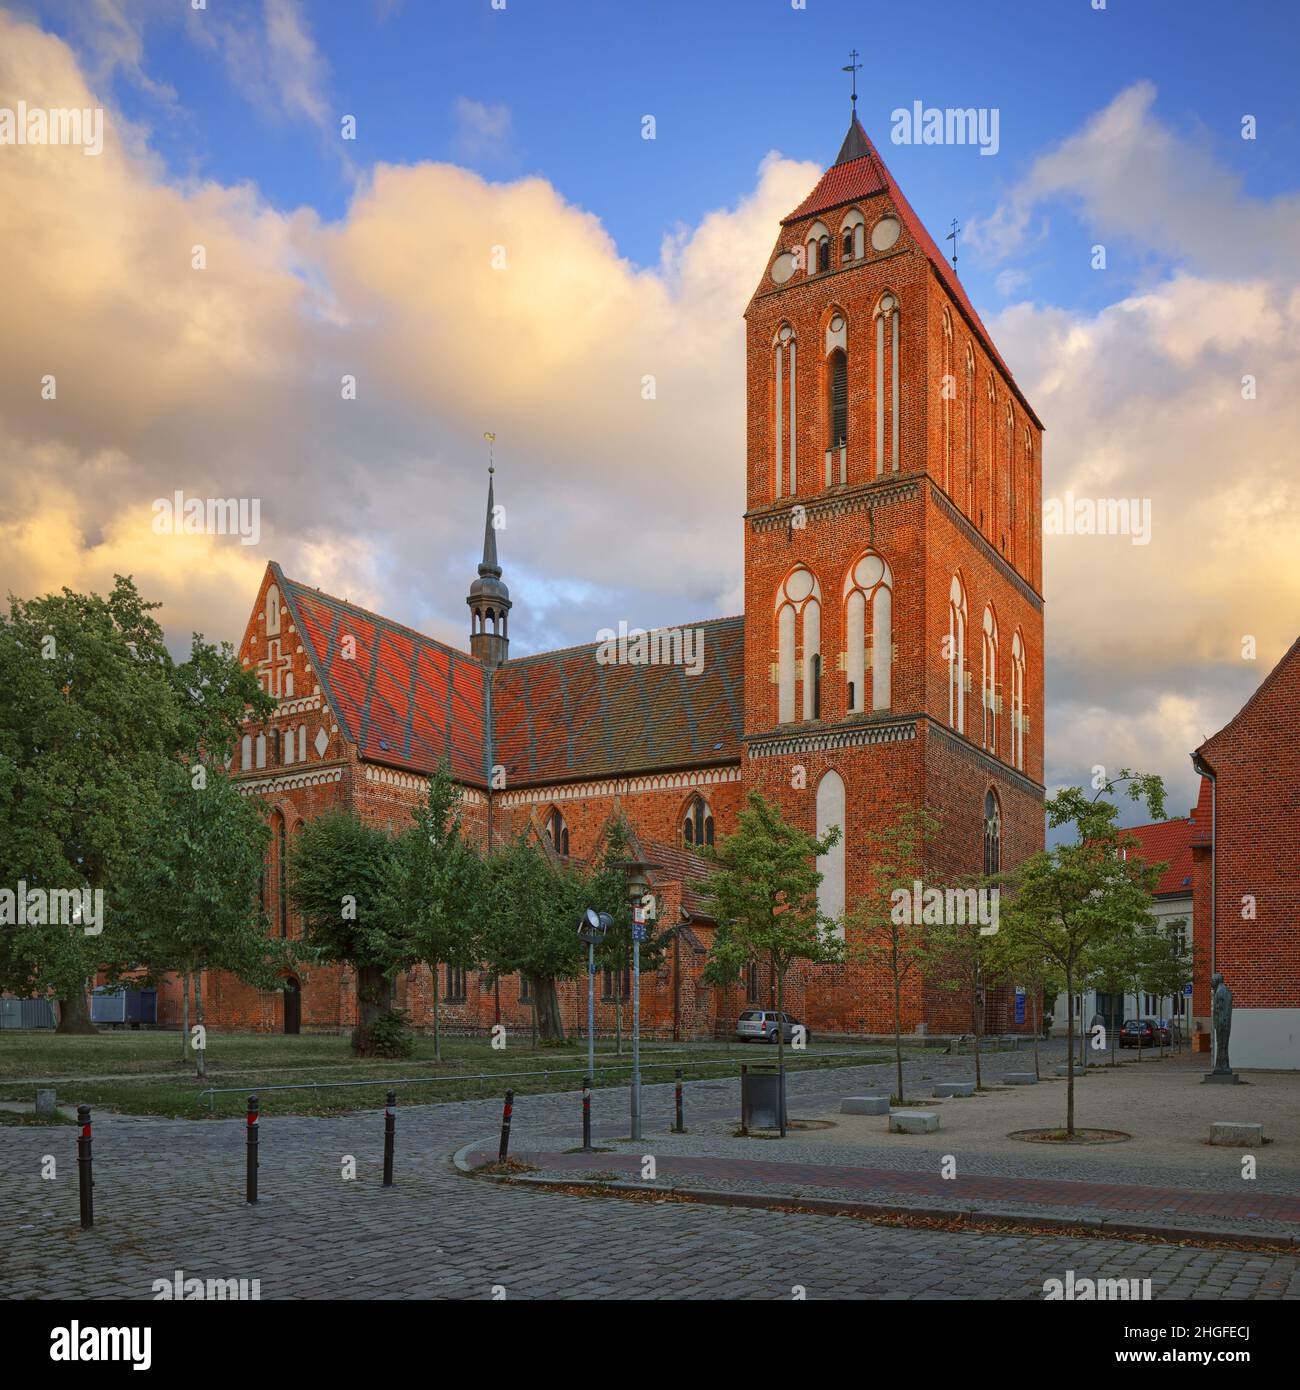 Germany, Güstrow Dom - Collegiate church of St. Mary, St. John the Evangelist and St. Cecilia - lutheran gothic medieval church Stock Photo